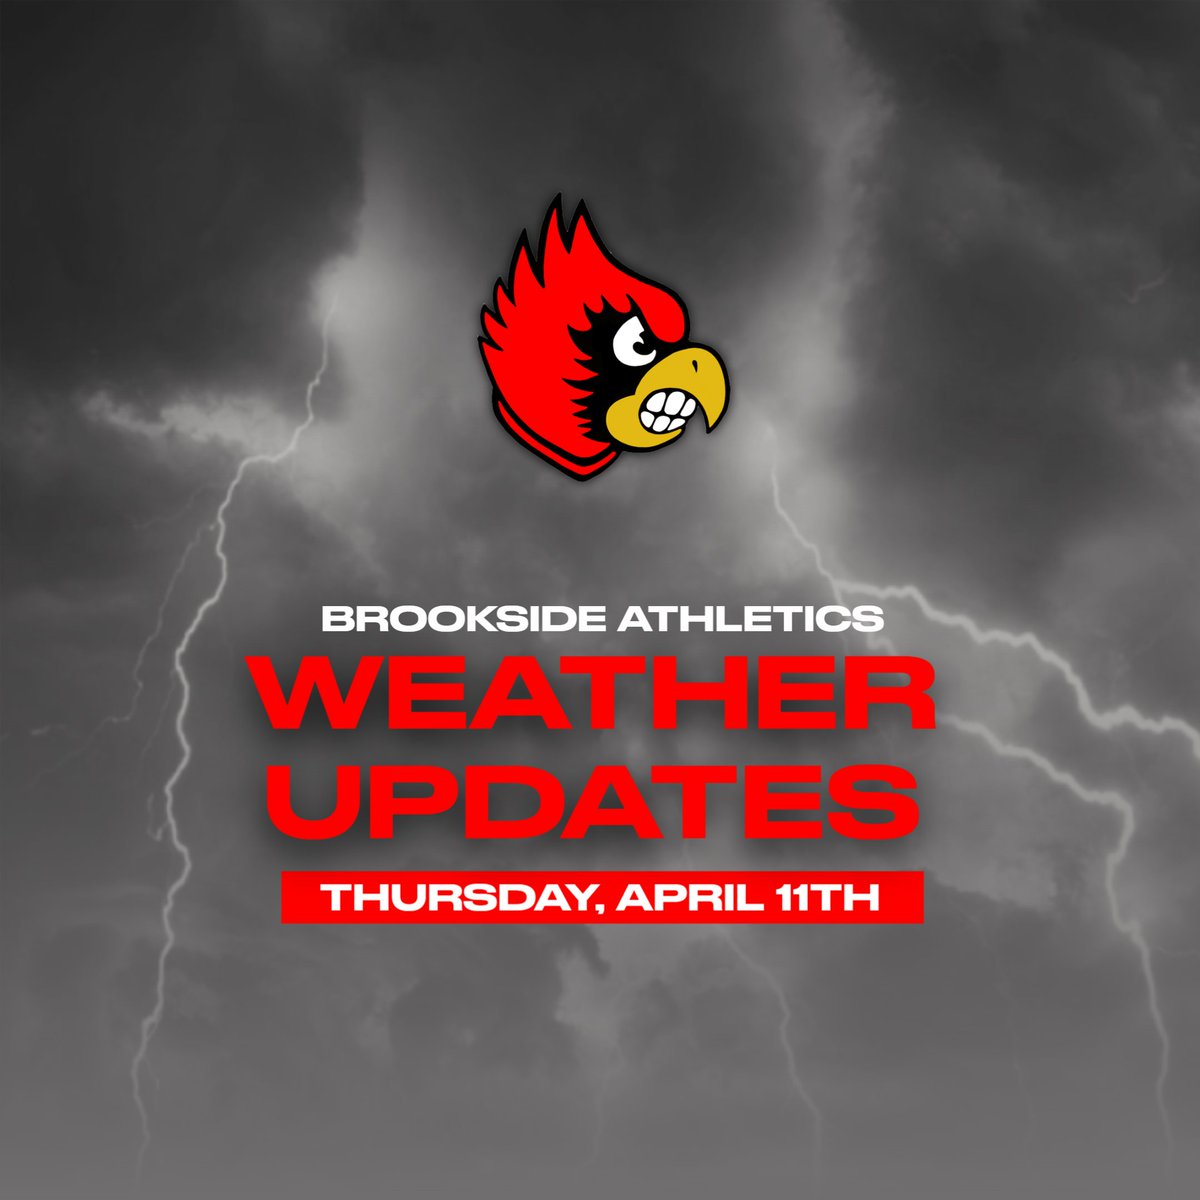 Updates for today's BHS & BMS athletic events: brooksidecardinals.com/news/91609